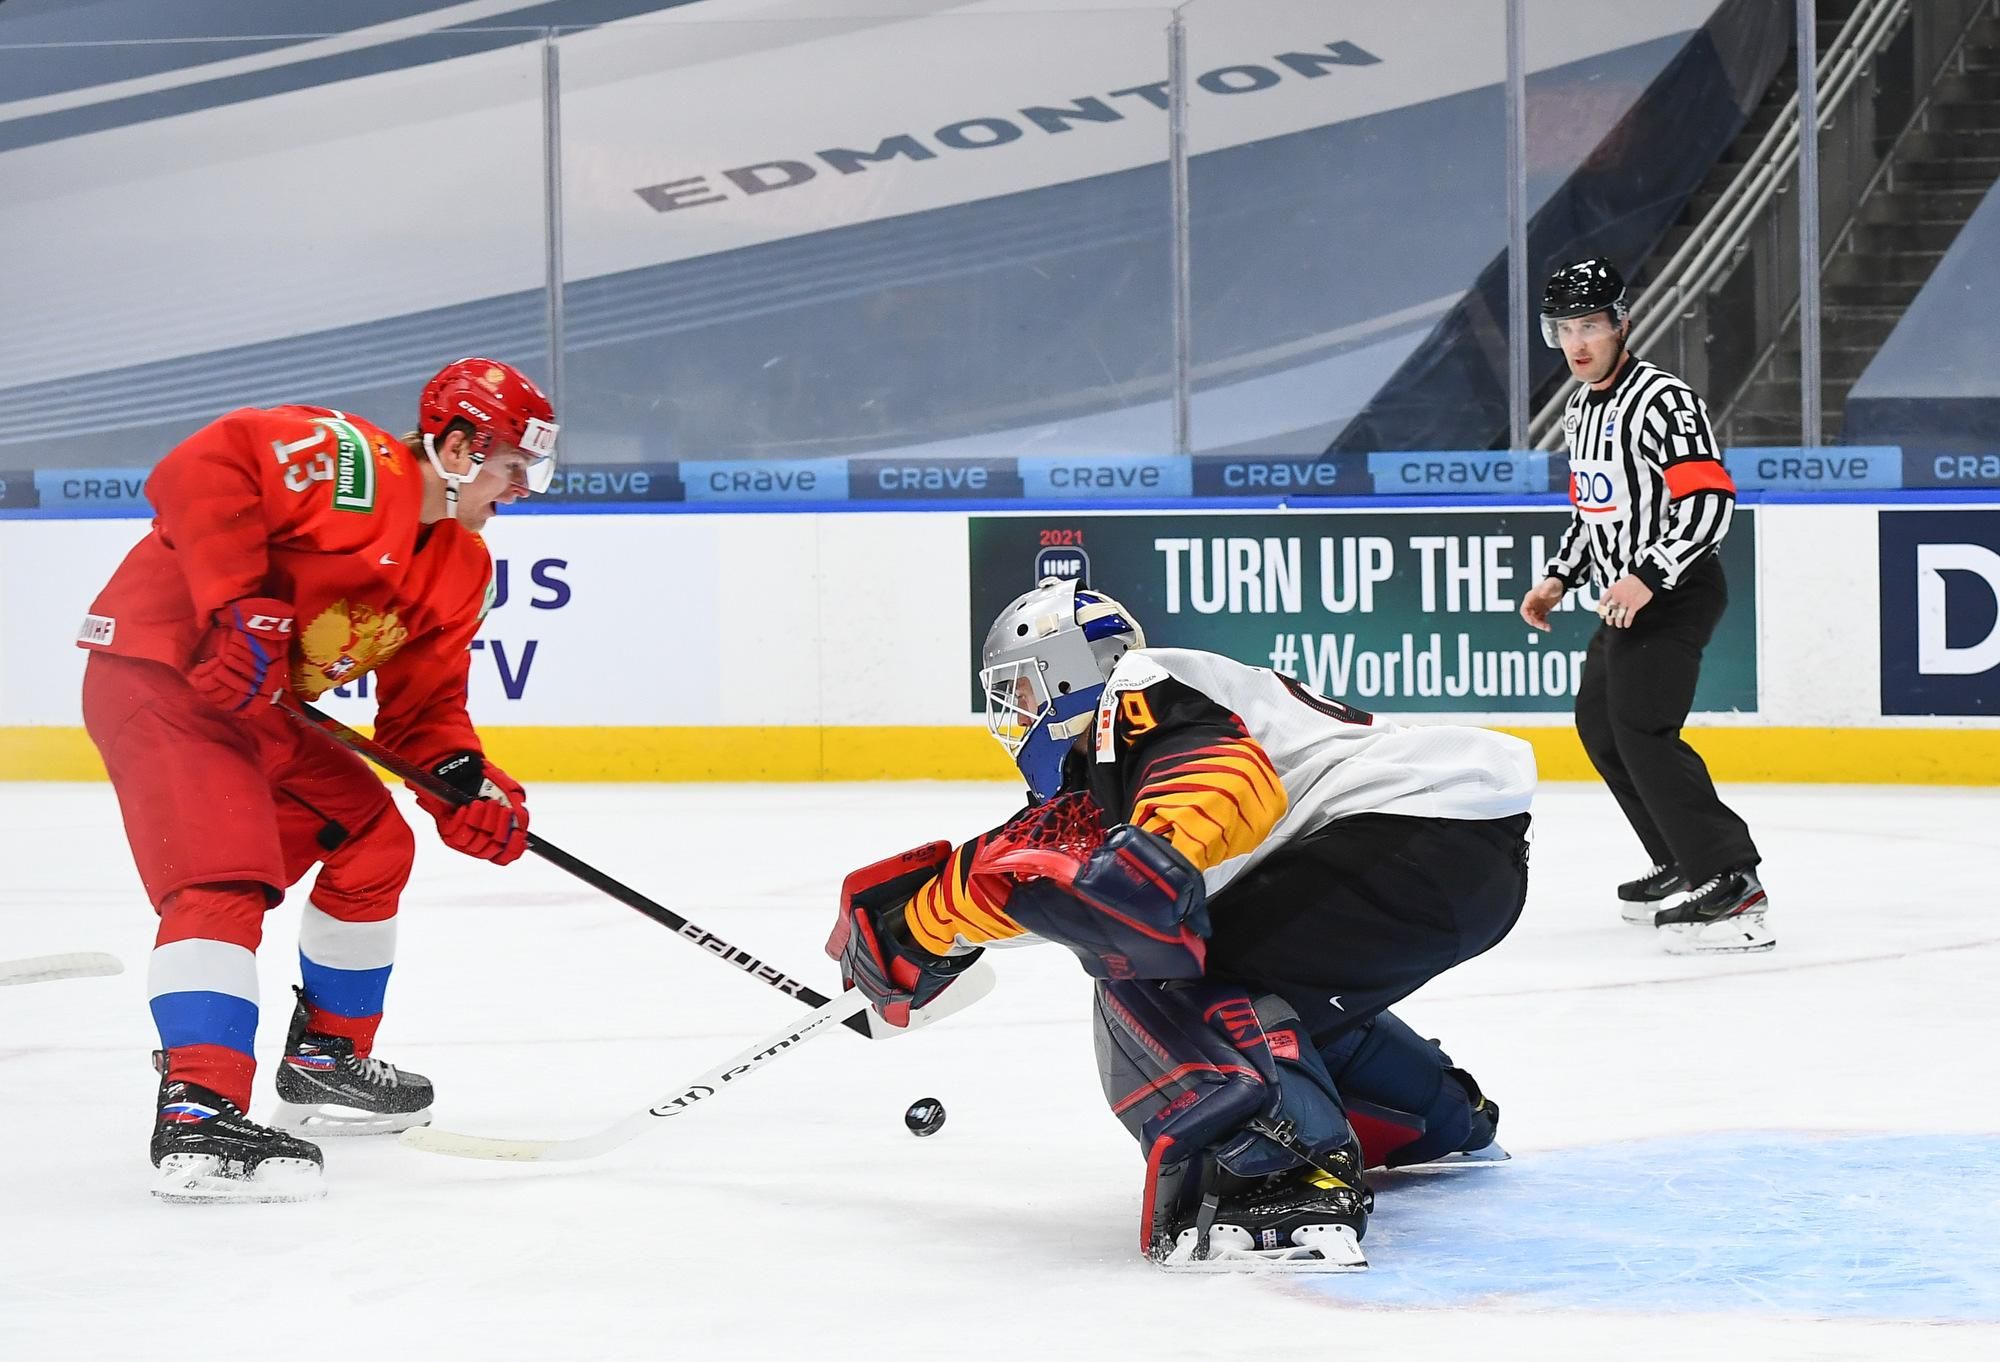 Vasili Ponomaryov scores the opening goal on a short-handed breakaway. photo: Andrea Cardin/HHOF-<a href="https://www.iihf.com/en/events/2021/wm20/news/23803/russia_qualifies_early">IIHF Images </a>